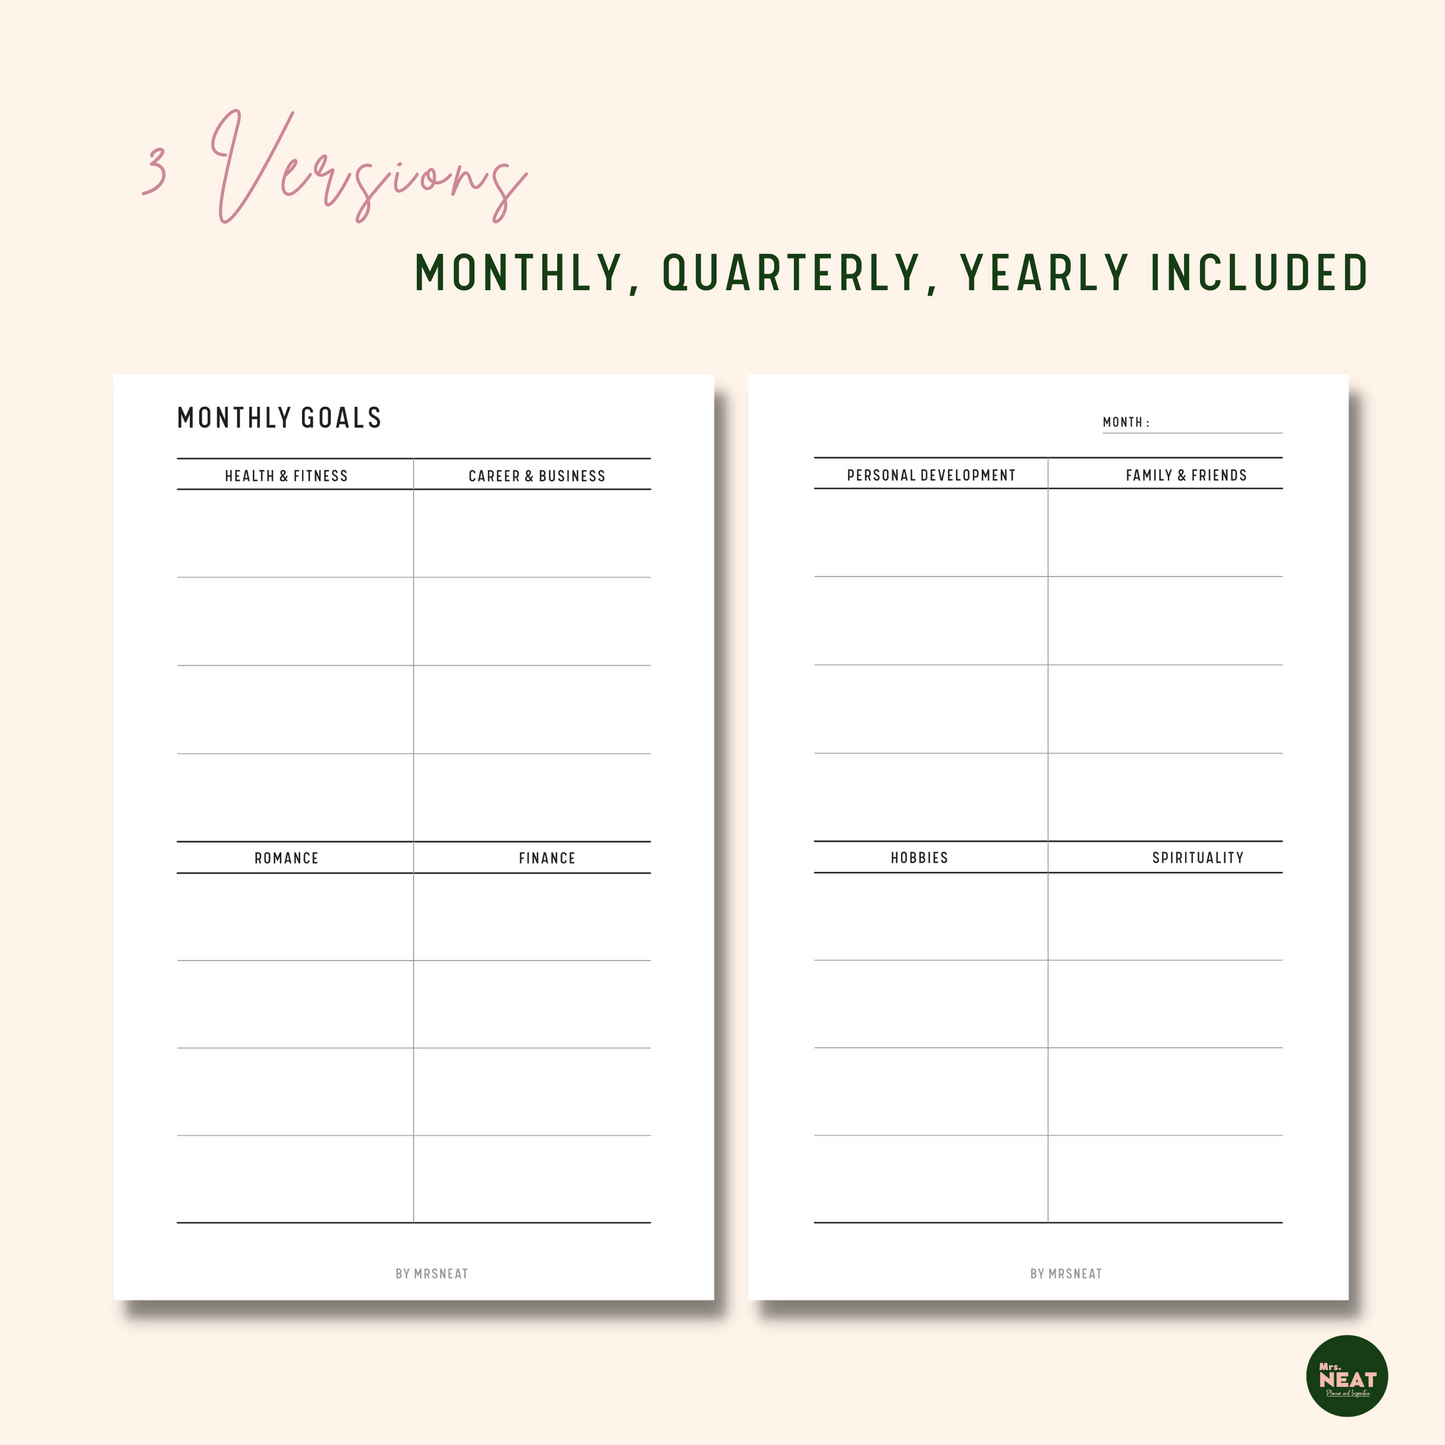 Minimalist 8 Areas of Life Goal Planner Printable for Monthly Goals in 2 pages